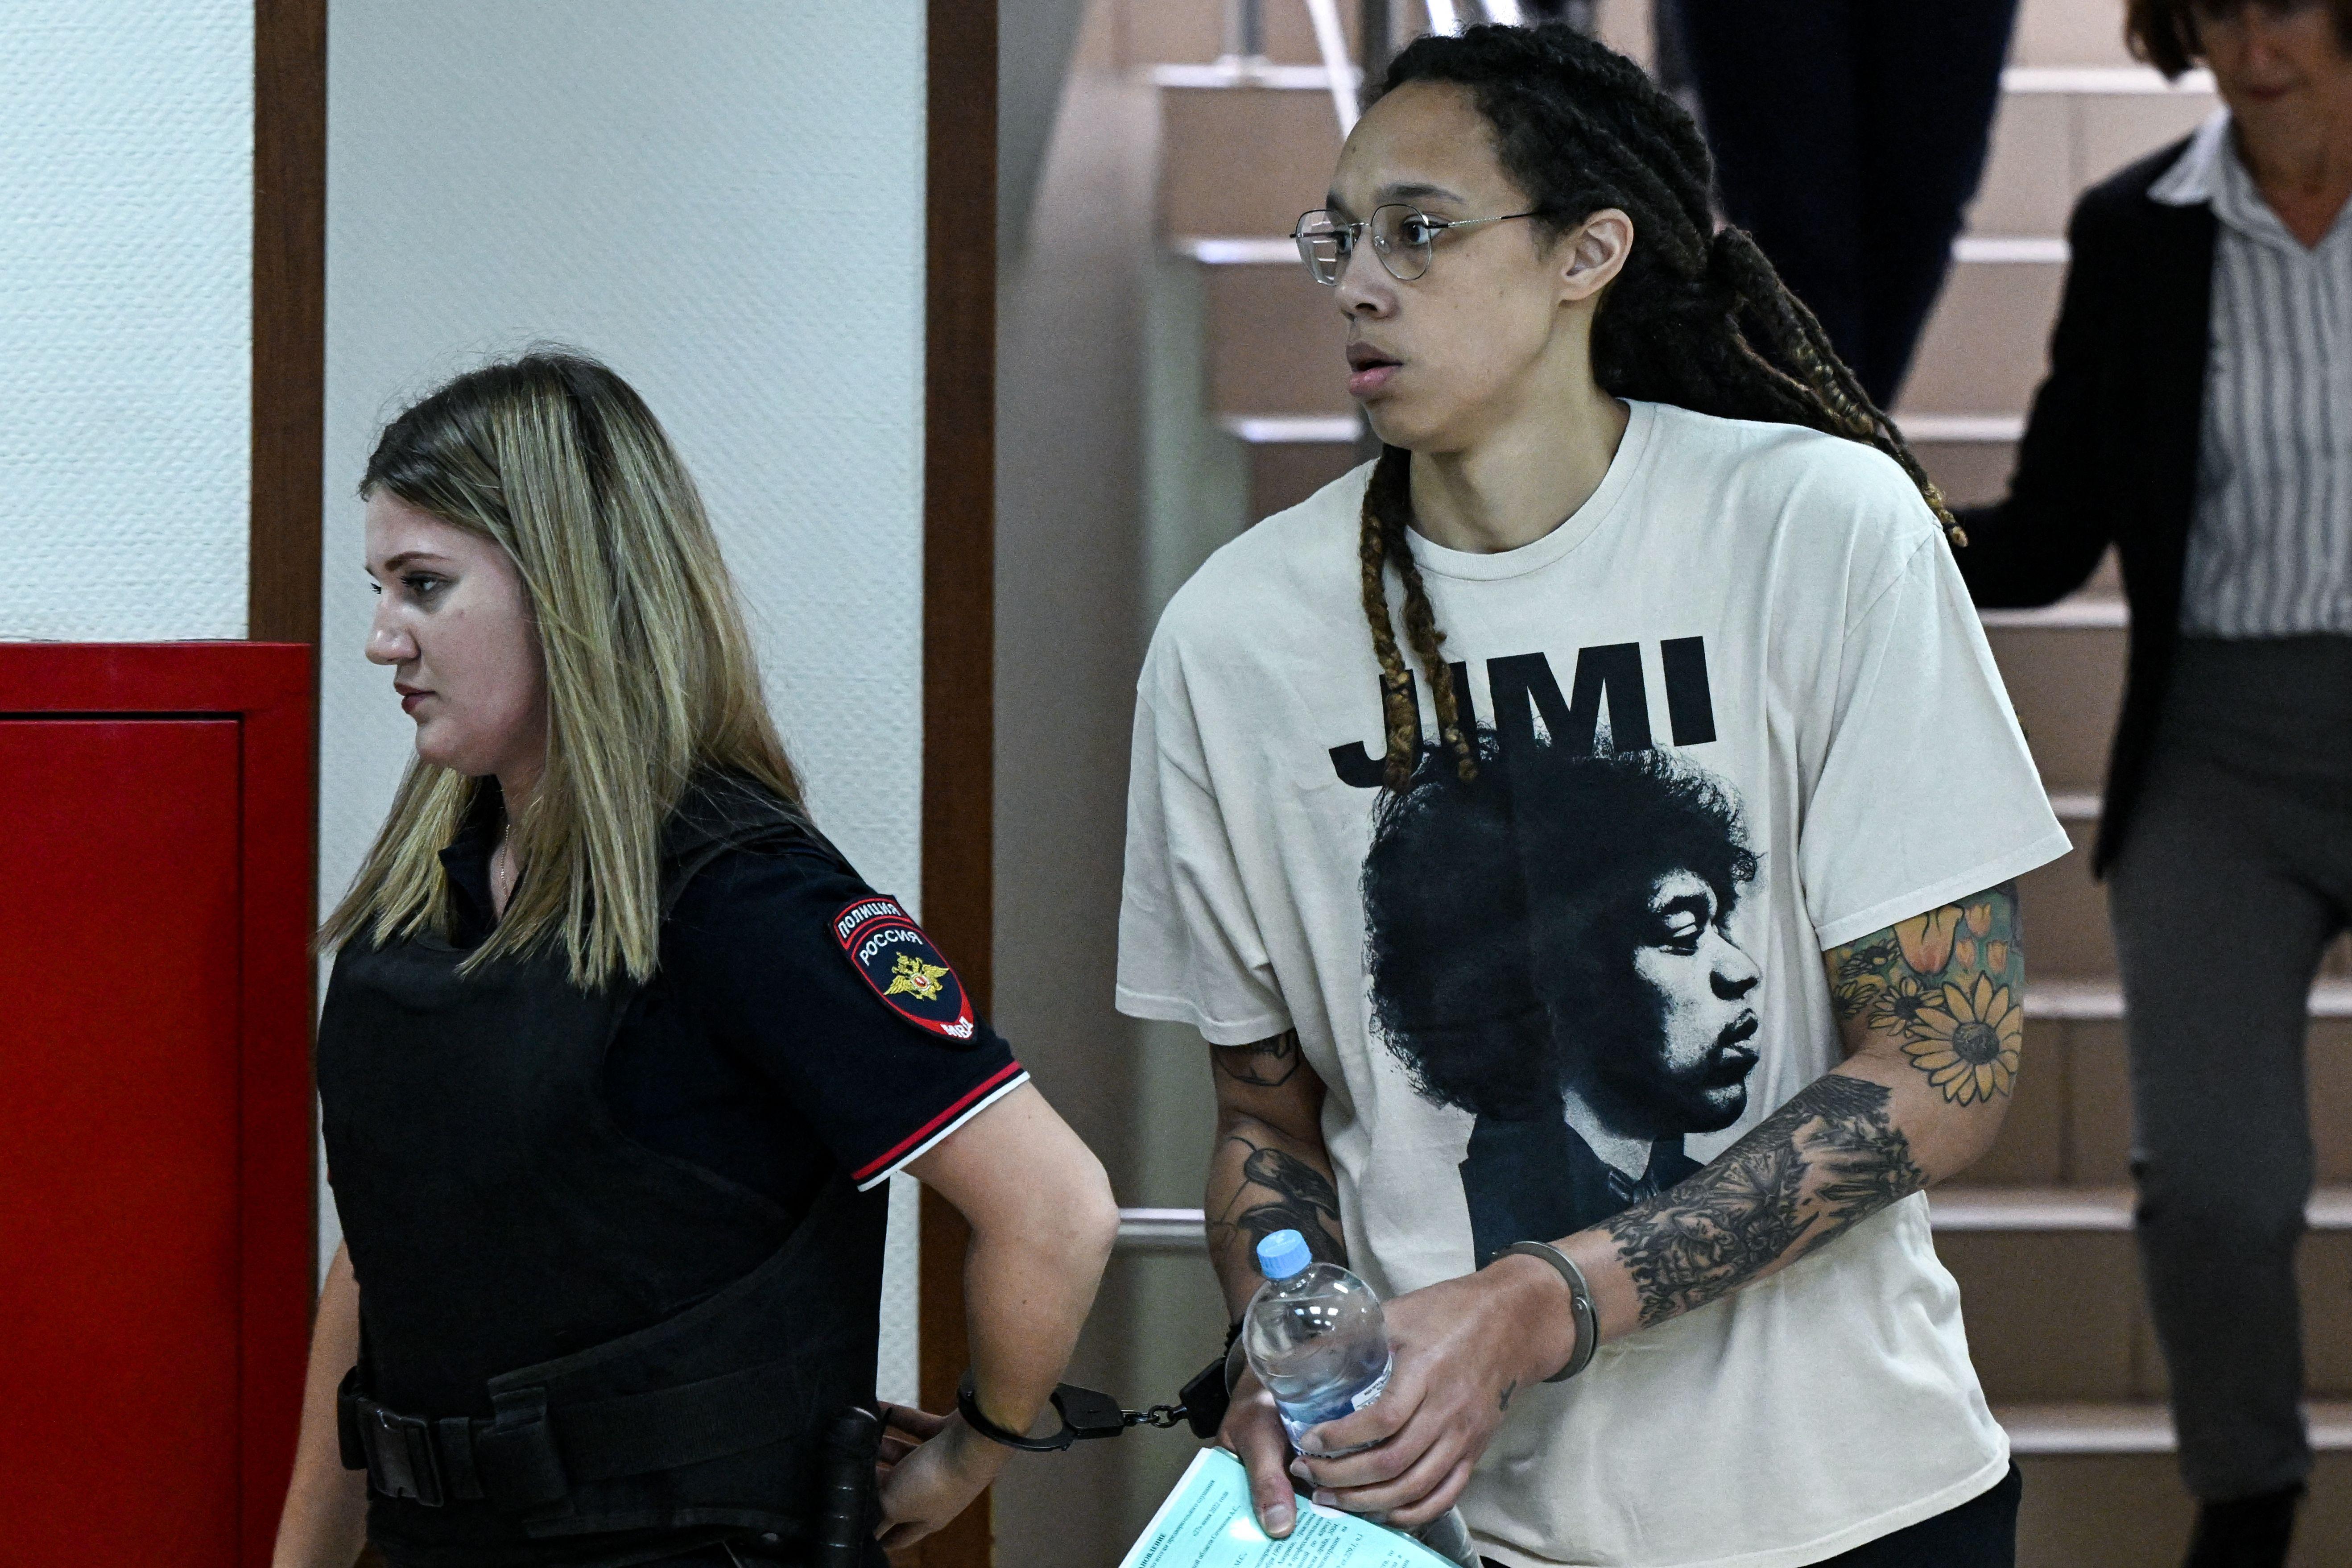 US WNBA basketball superstar Brittney Griner arrives to a hearing at the Khimki Court, outside Moscow on July 1, 2022. - Griner, a two-time Olympic gold medallist and WNBA champion, was detained at Moscow airport in February on charges of carrying in her luggage vape cartridges with cannabis oil, which could carry a 10-year prison sentence. (Photo by Kirill KUDRYAVTSEV / AFP) (Photo by KIRILL KUDRYAVTSEV/AFP via Getty Images)